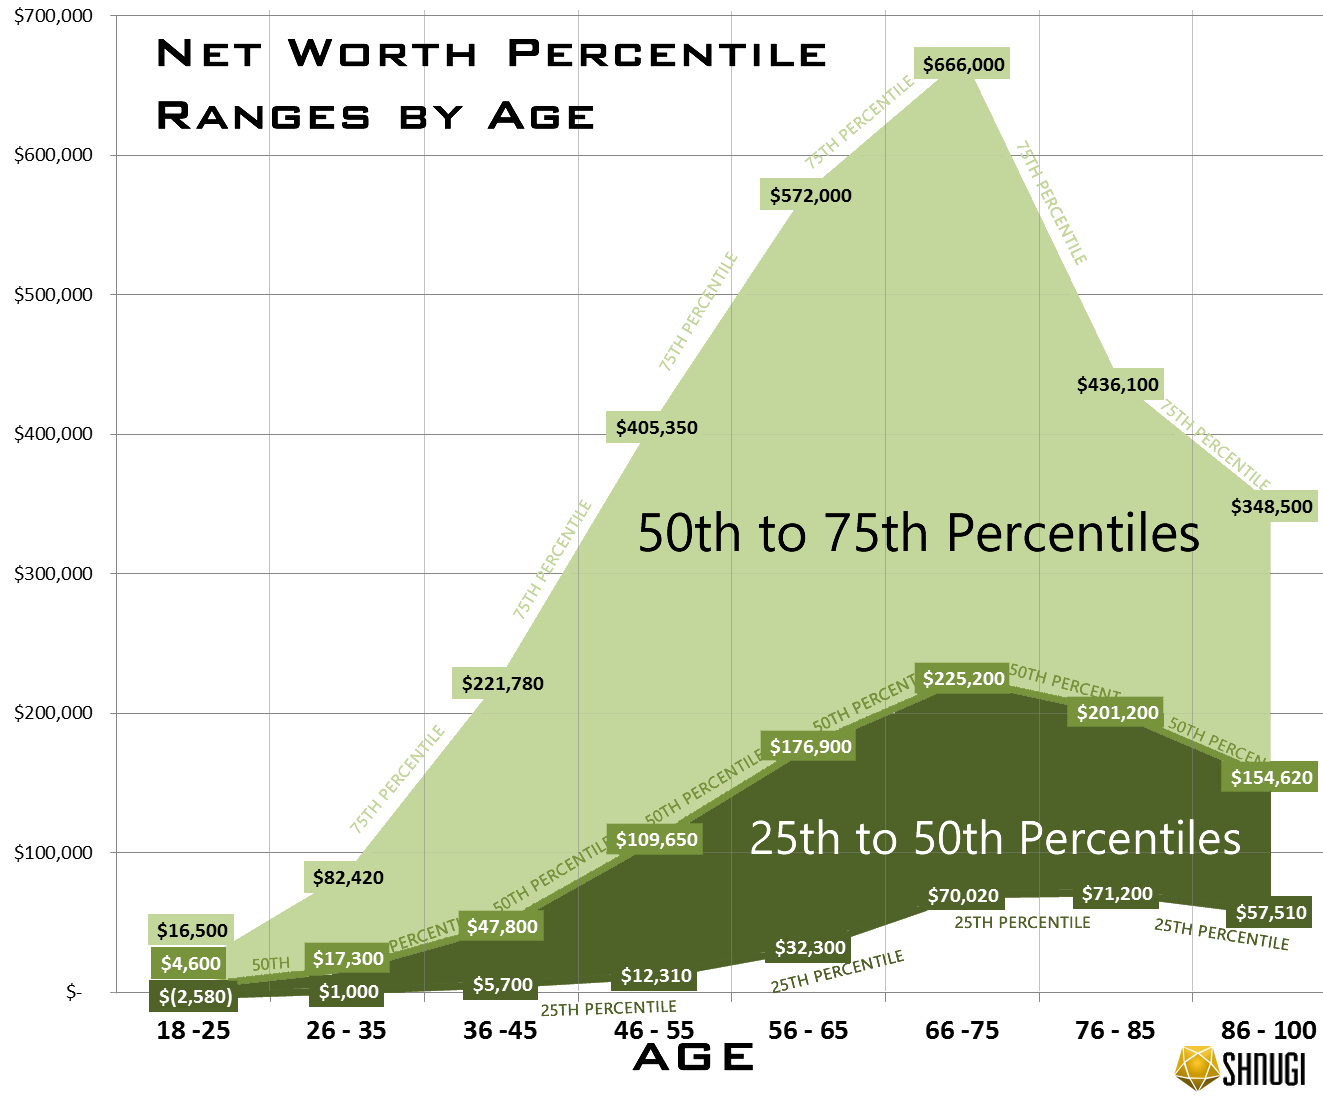 explore-net-worth-rankings-by-age-25th-to-75th-percentiles-personal-finance-data